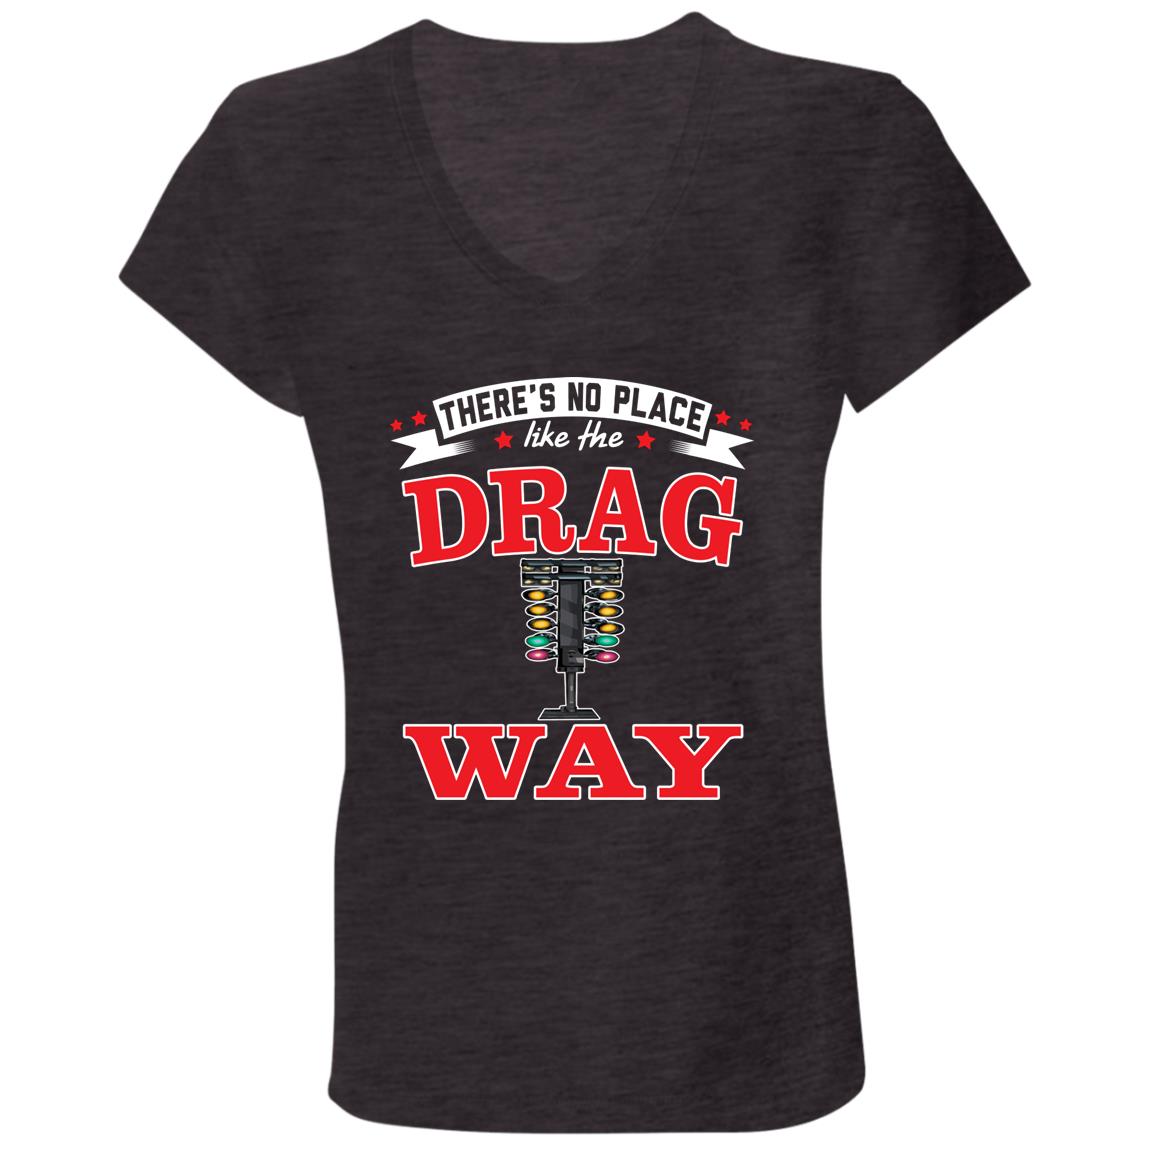 There's No Place Like The Dragway Ladies' Jersey V-Neck T-Shirt